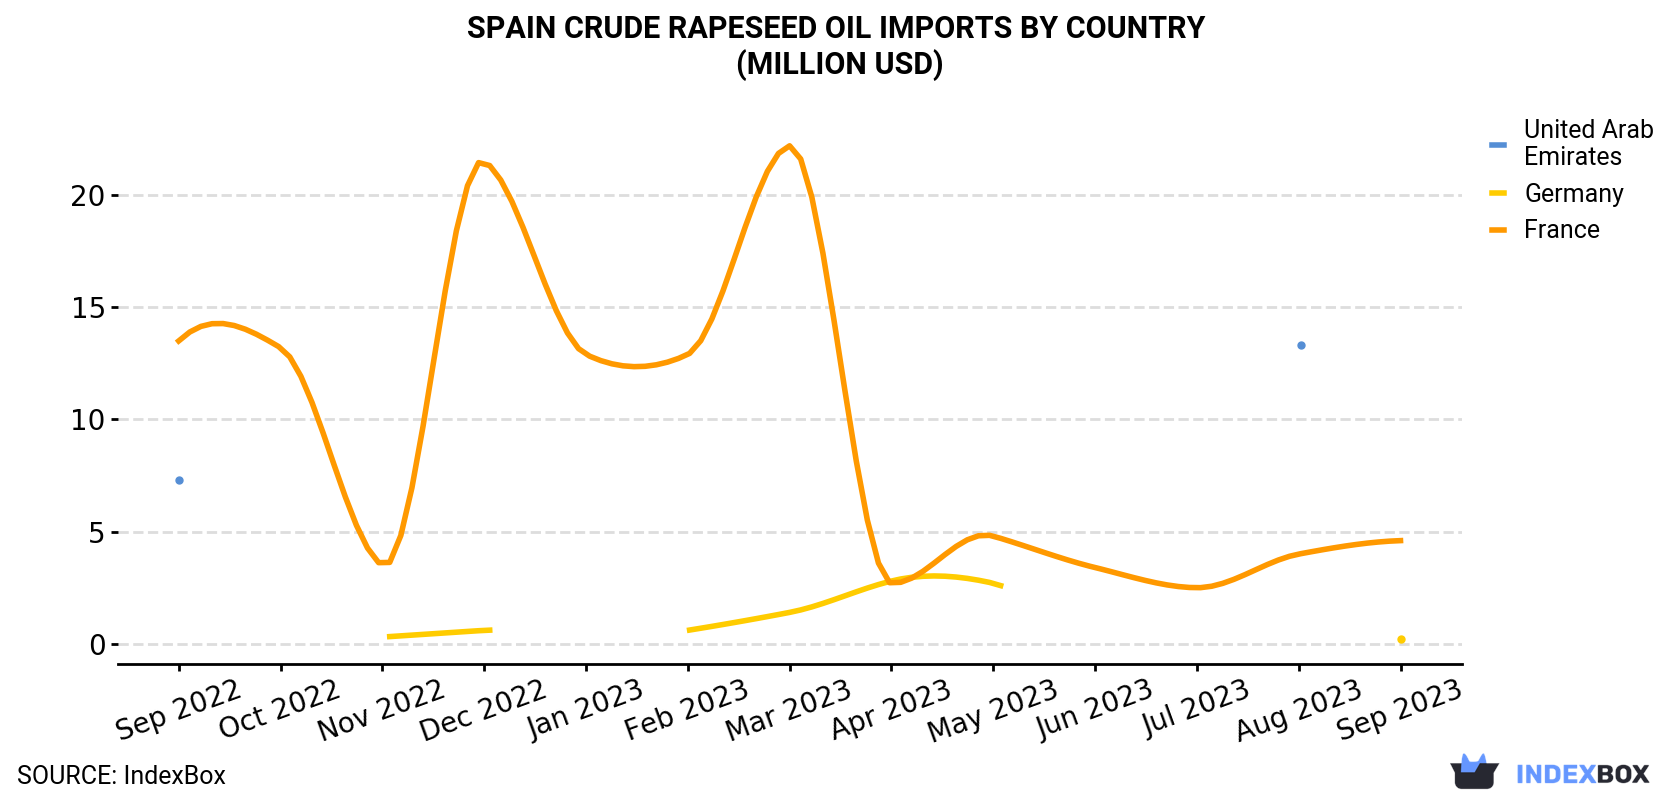 Spain Crude Rapeseed Oil Imports By Country (Million USD)